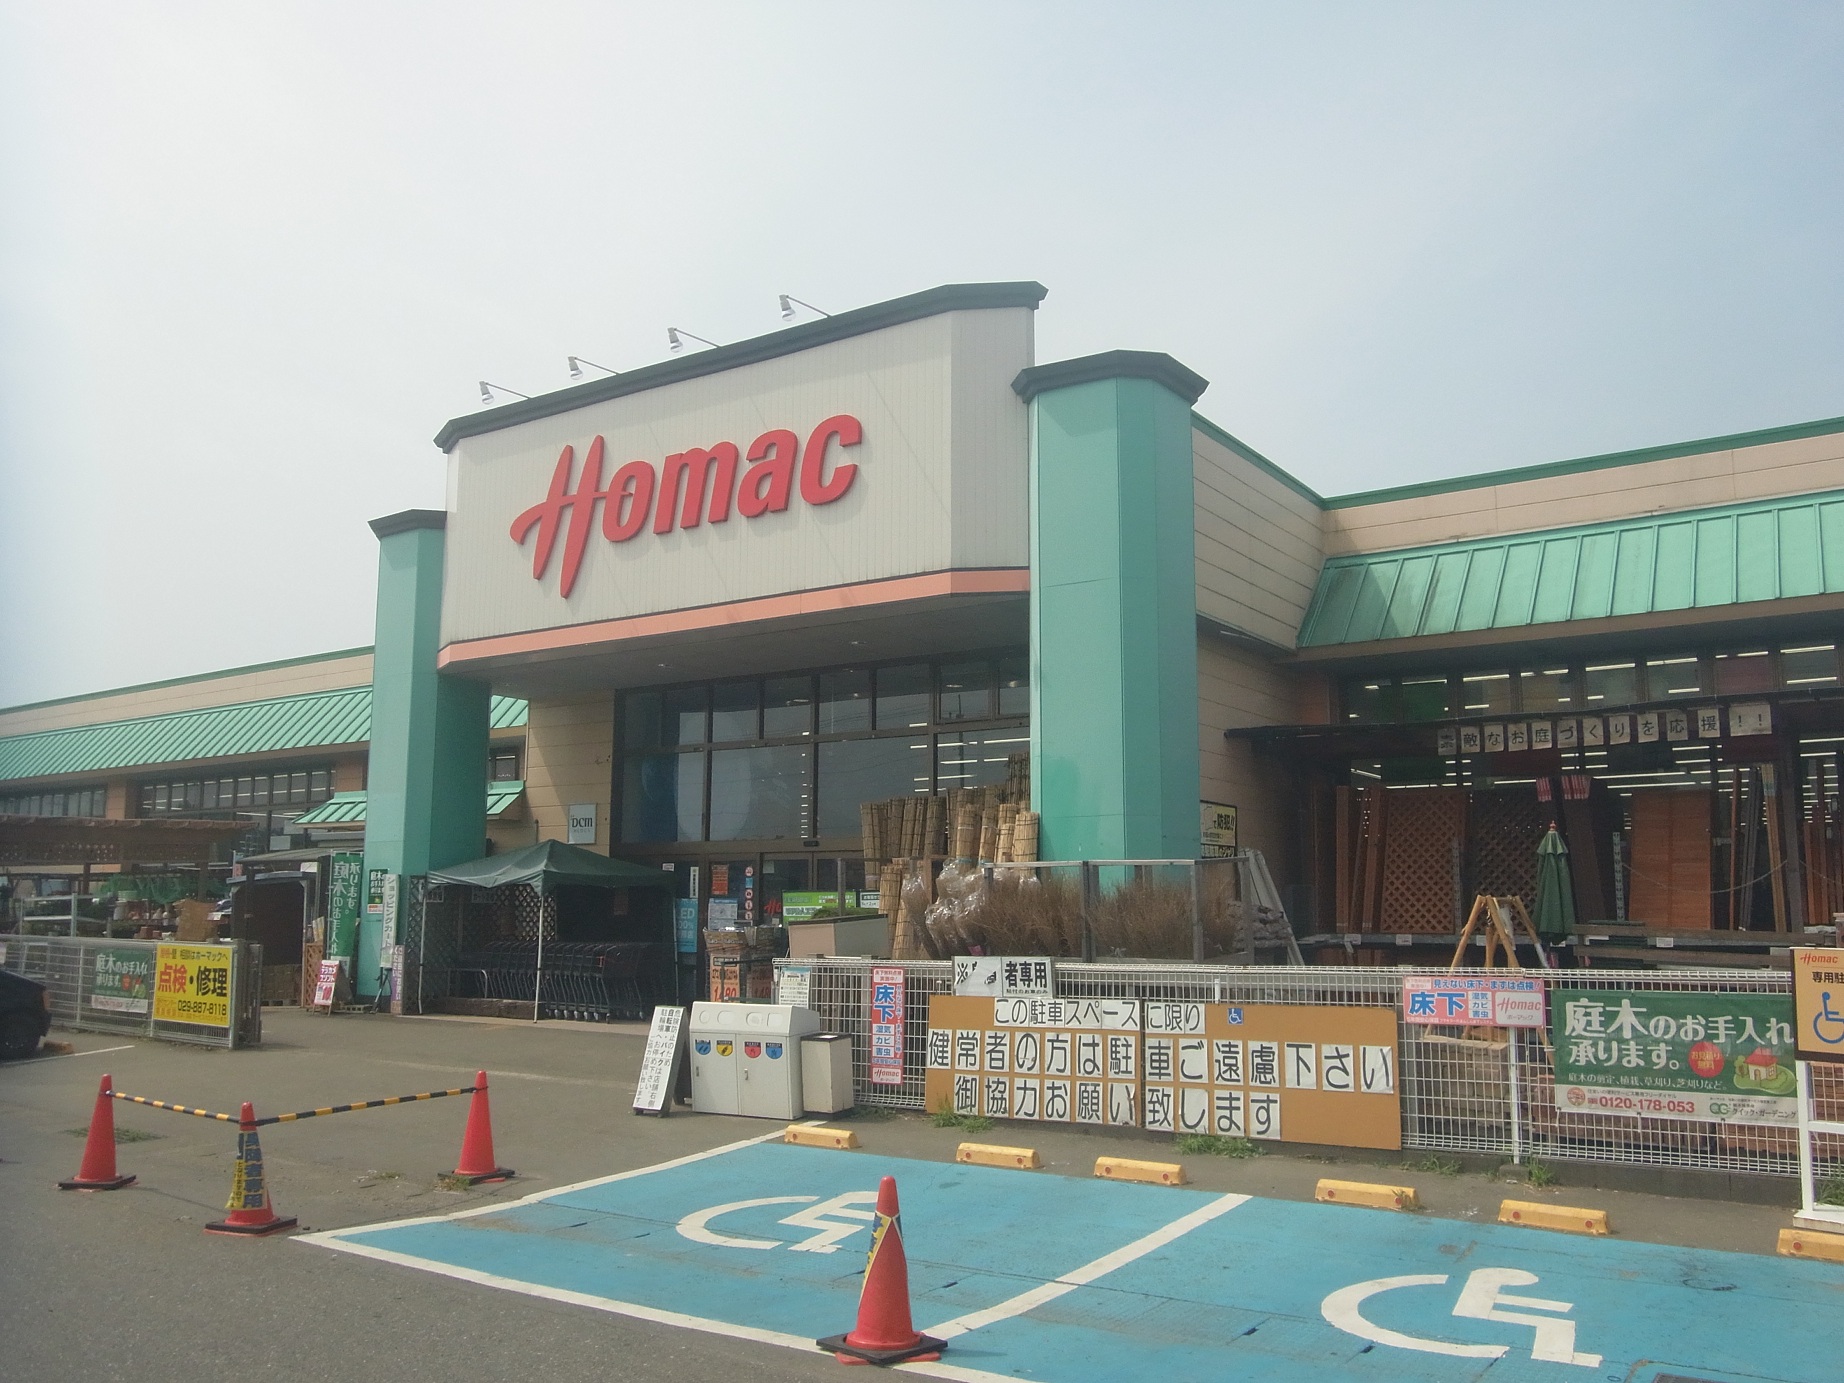 Home center. (Hardware store) to 430m